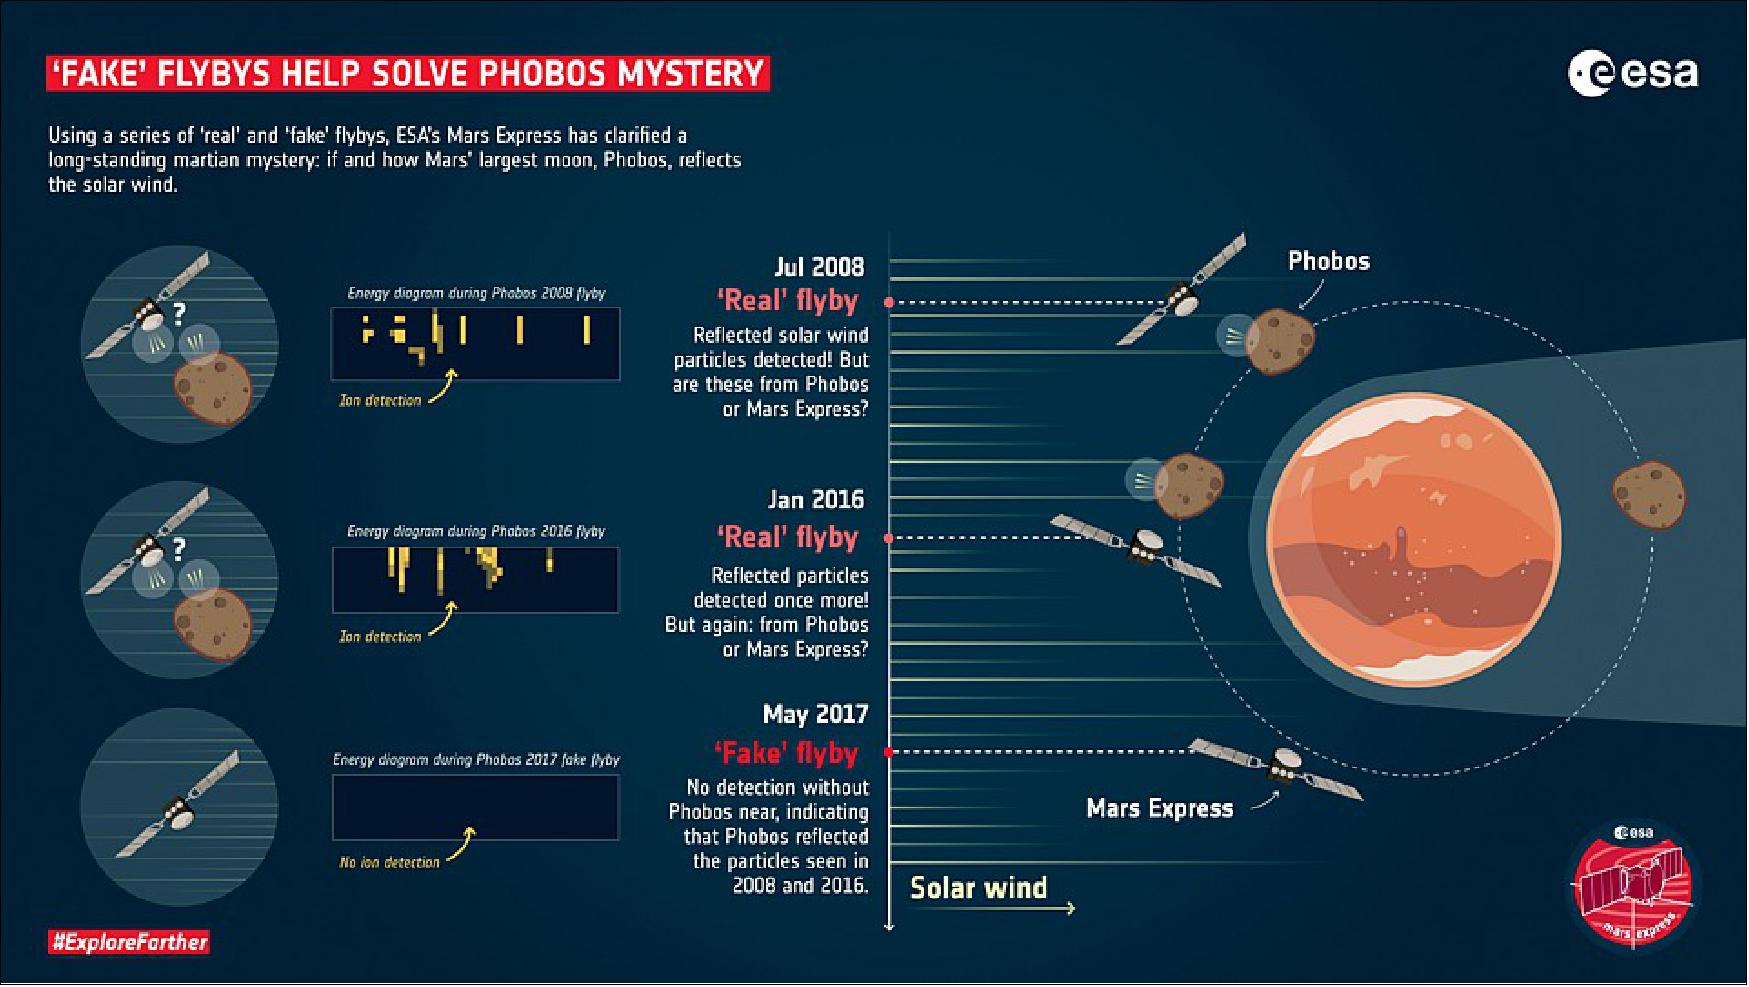 Figure 40: Using a series of 'real' and 'fake' flybys, ESA's Mars Express has clarified a long-standing martian mystery: if and how Mars' largest moon, Phobos, reflects the solar wind. This infographic shows three Mars Express flybys that occurred in July 2008, January 2016 and May 2017 – the former two being 'real' flybys completed in the vicinity of Phobos, and latter being a 'fake' flyby performed to clarify whether a particular signal detected by the spacecraft was a true detection of a process taking place on Phobos, or if it was due to reflection of particles from Mars Express itself (image credit: ESA)